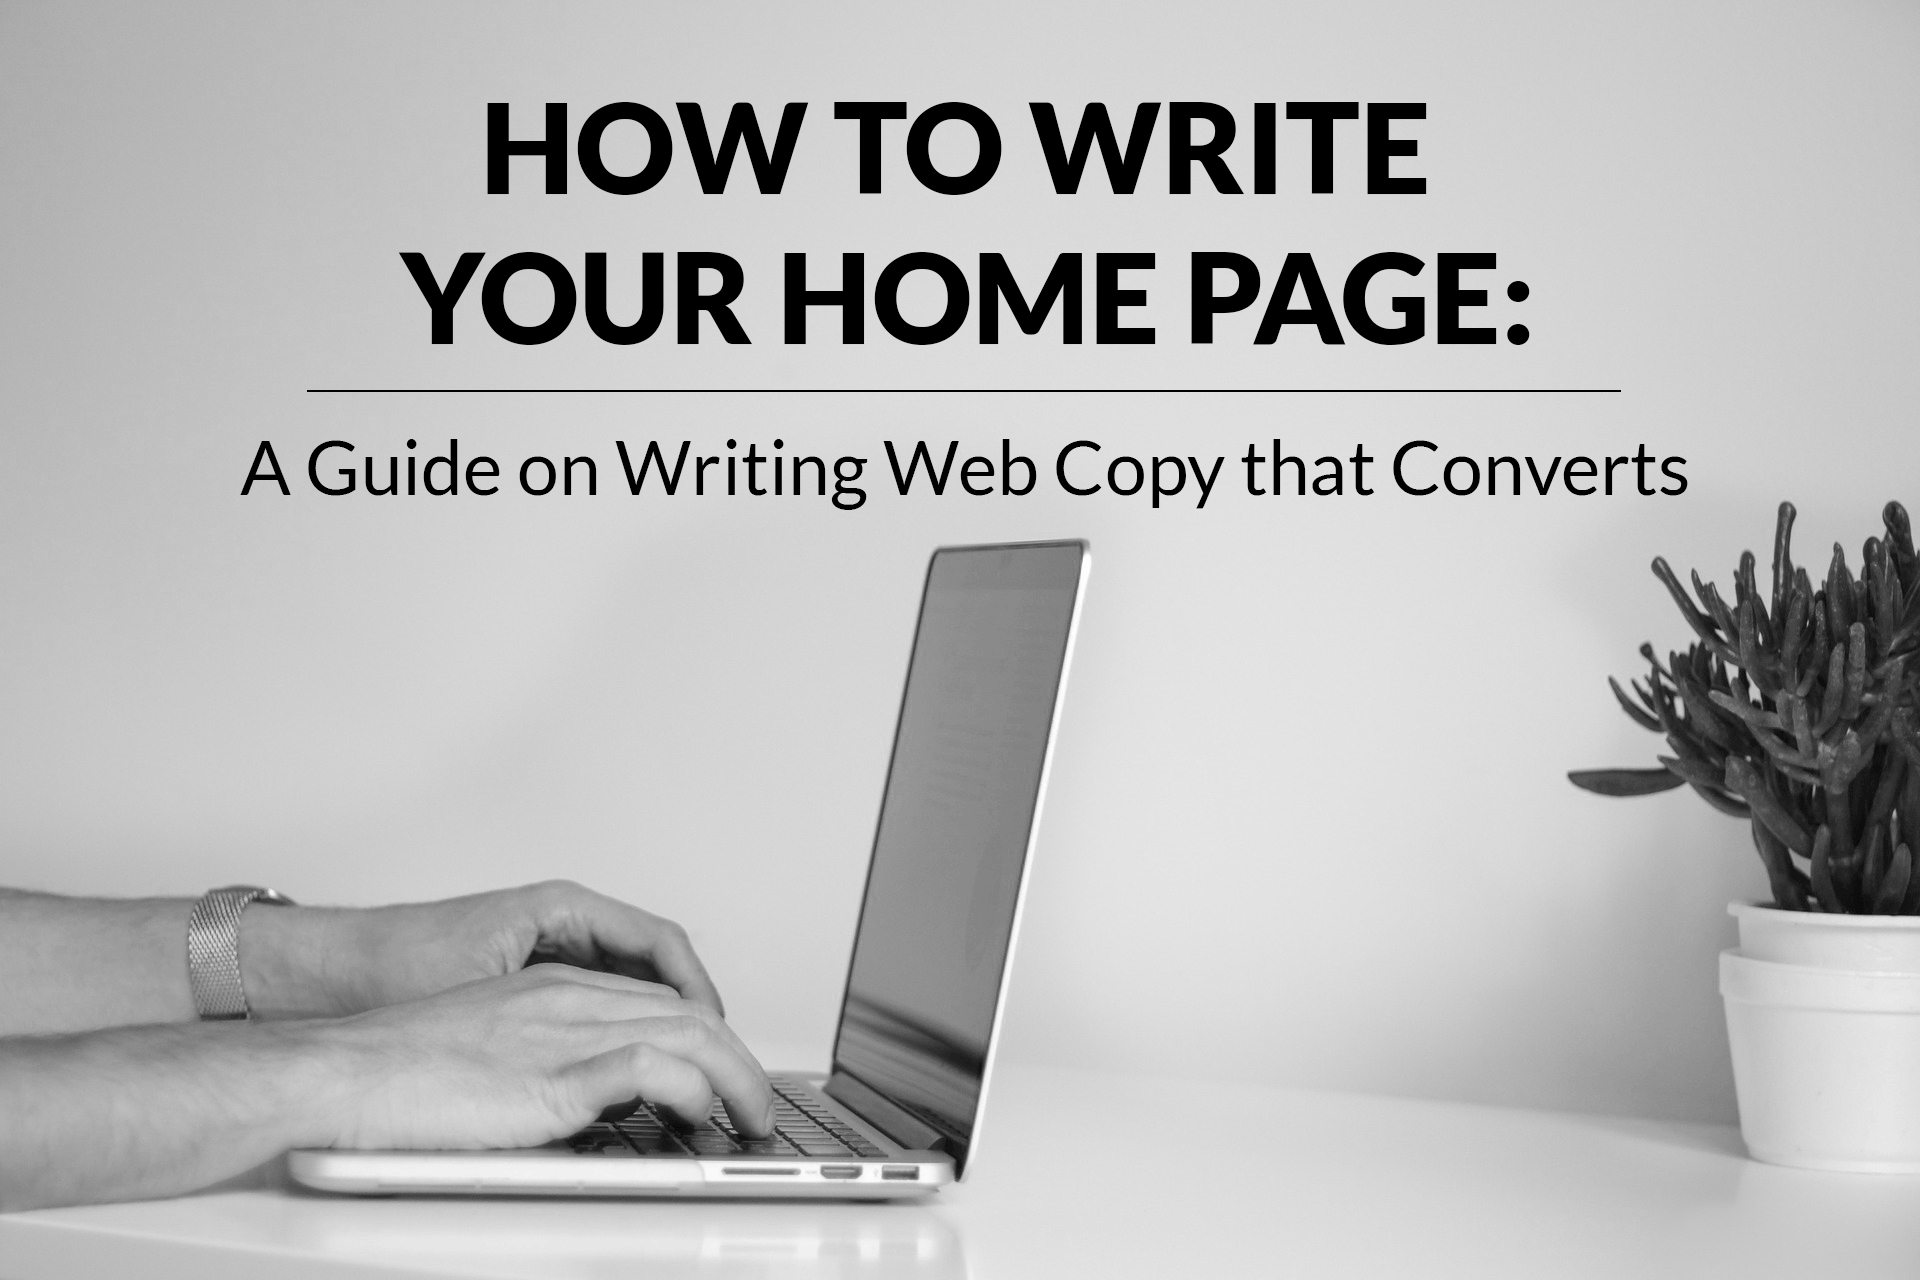 writing copy for websites